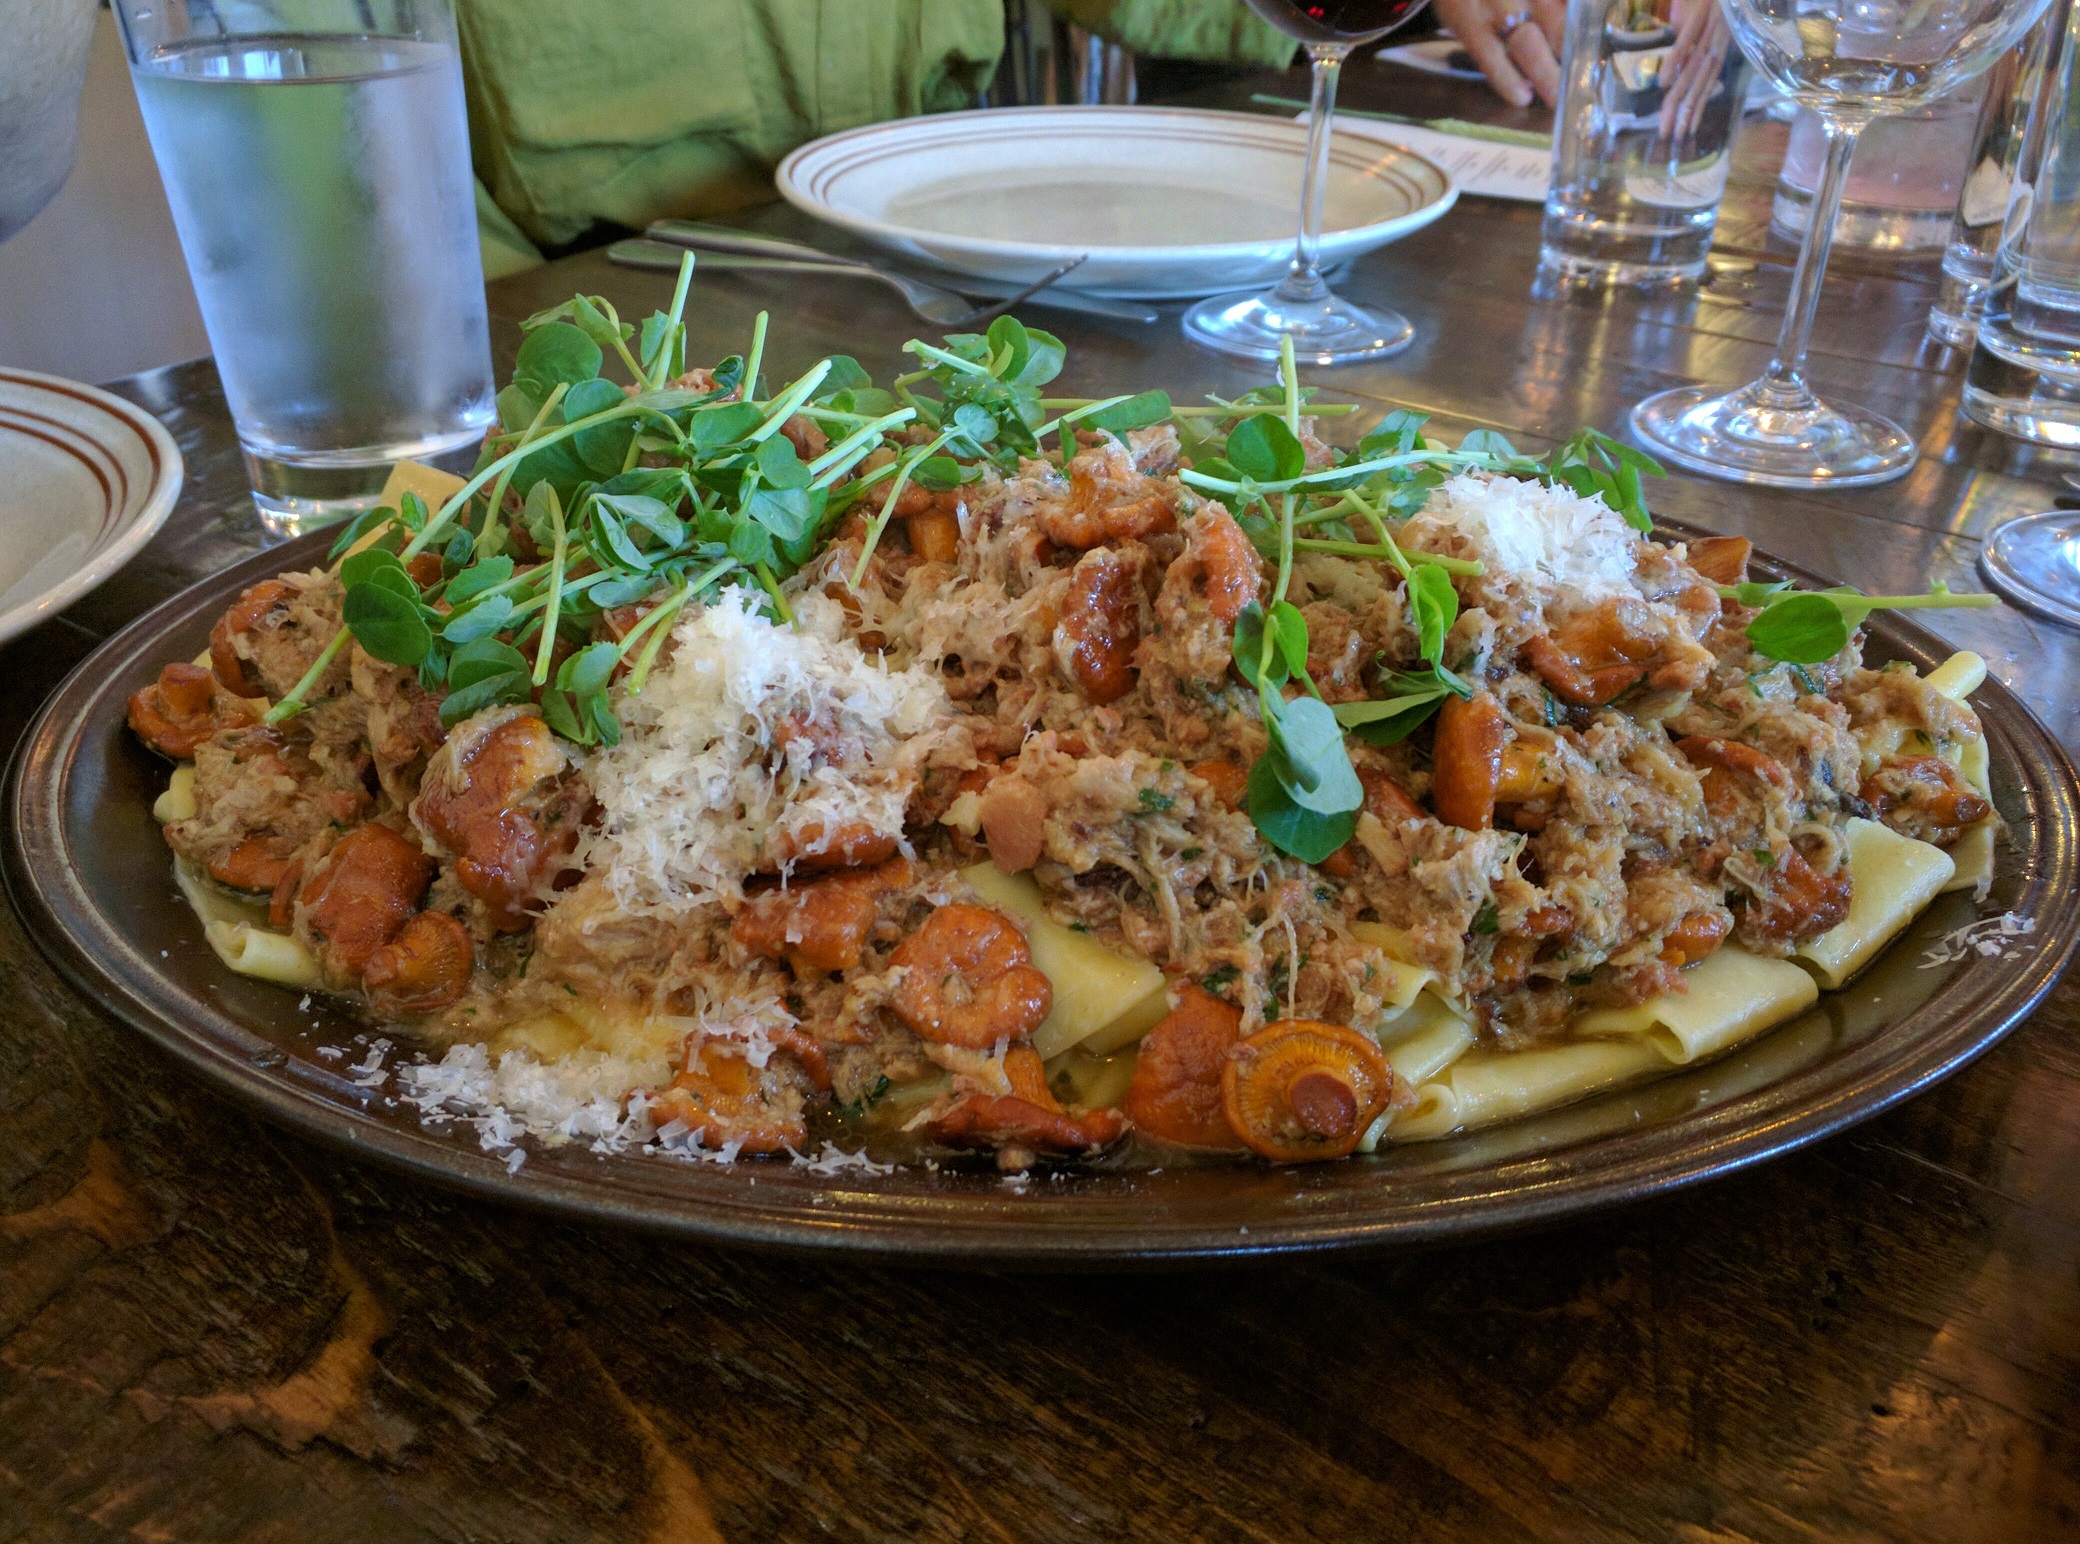 House-made pasta with mushroom ragu from Hayloft in Airdrie.